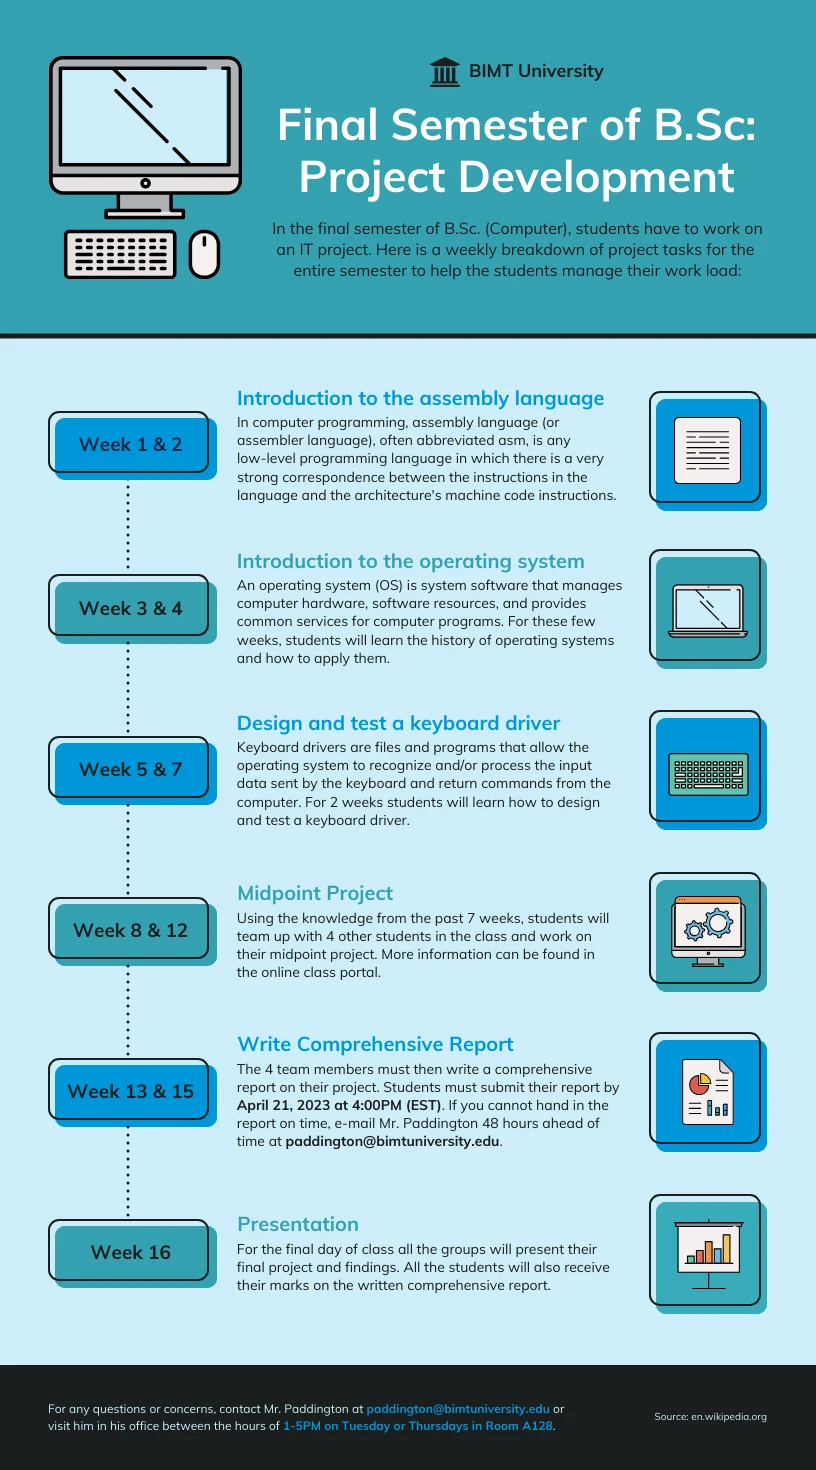 How to Create a Timeline Infographic - Venngage